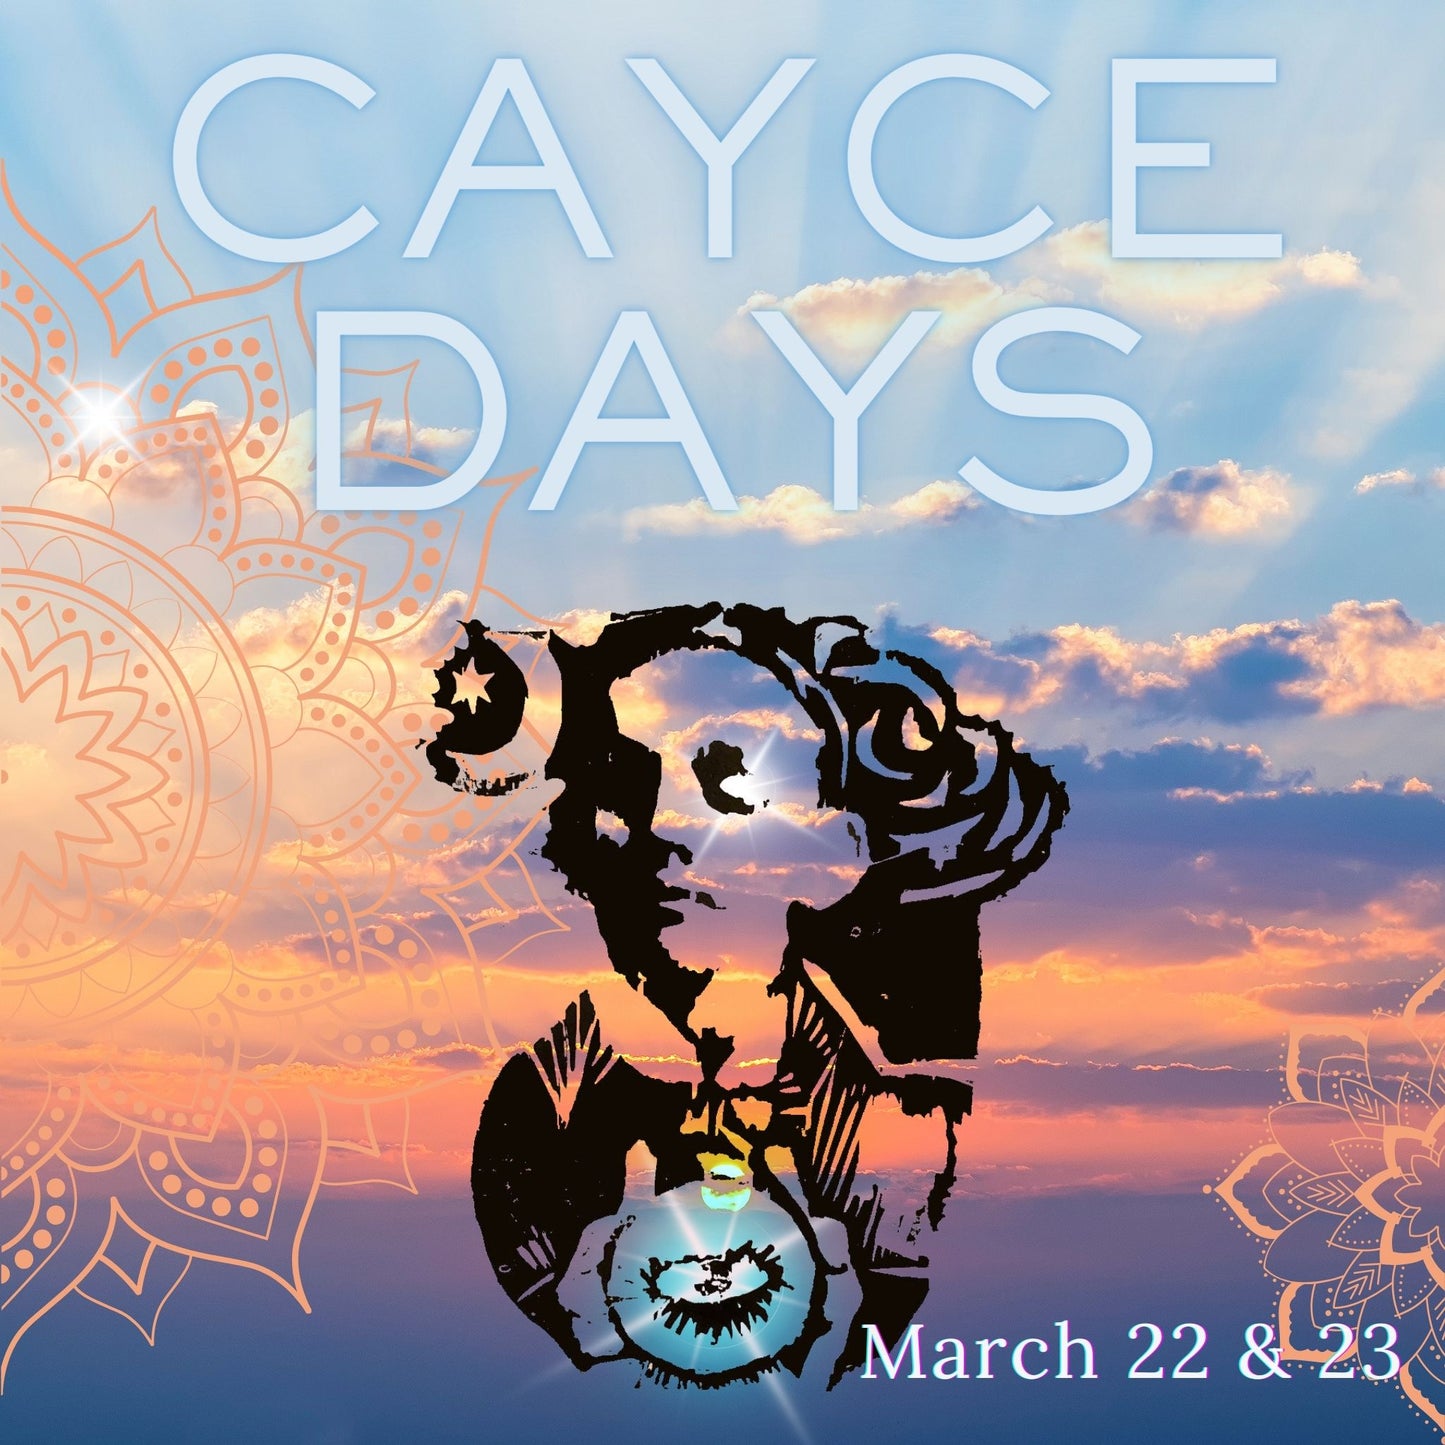 Cayce Days Sessions